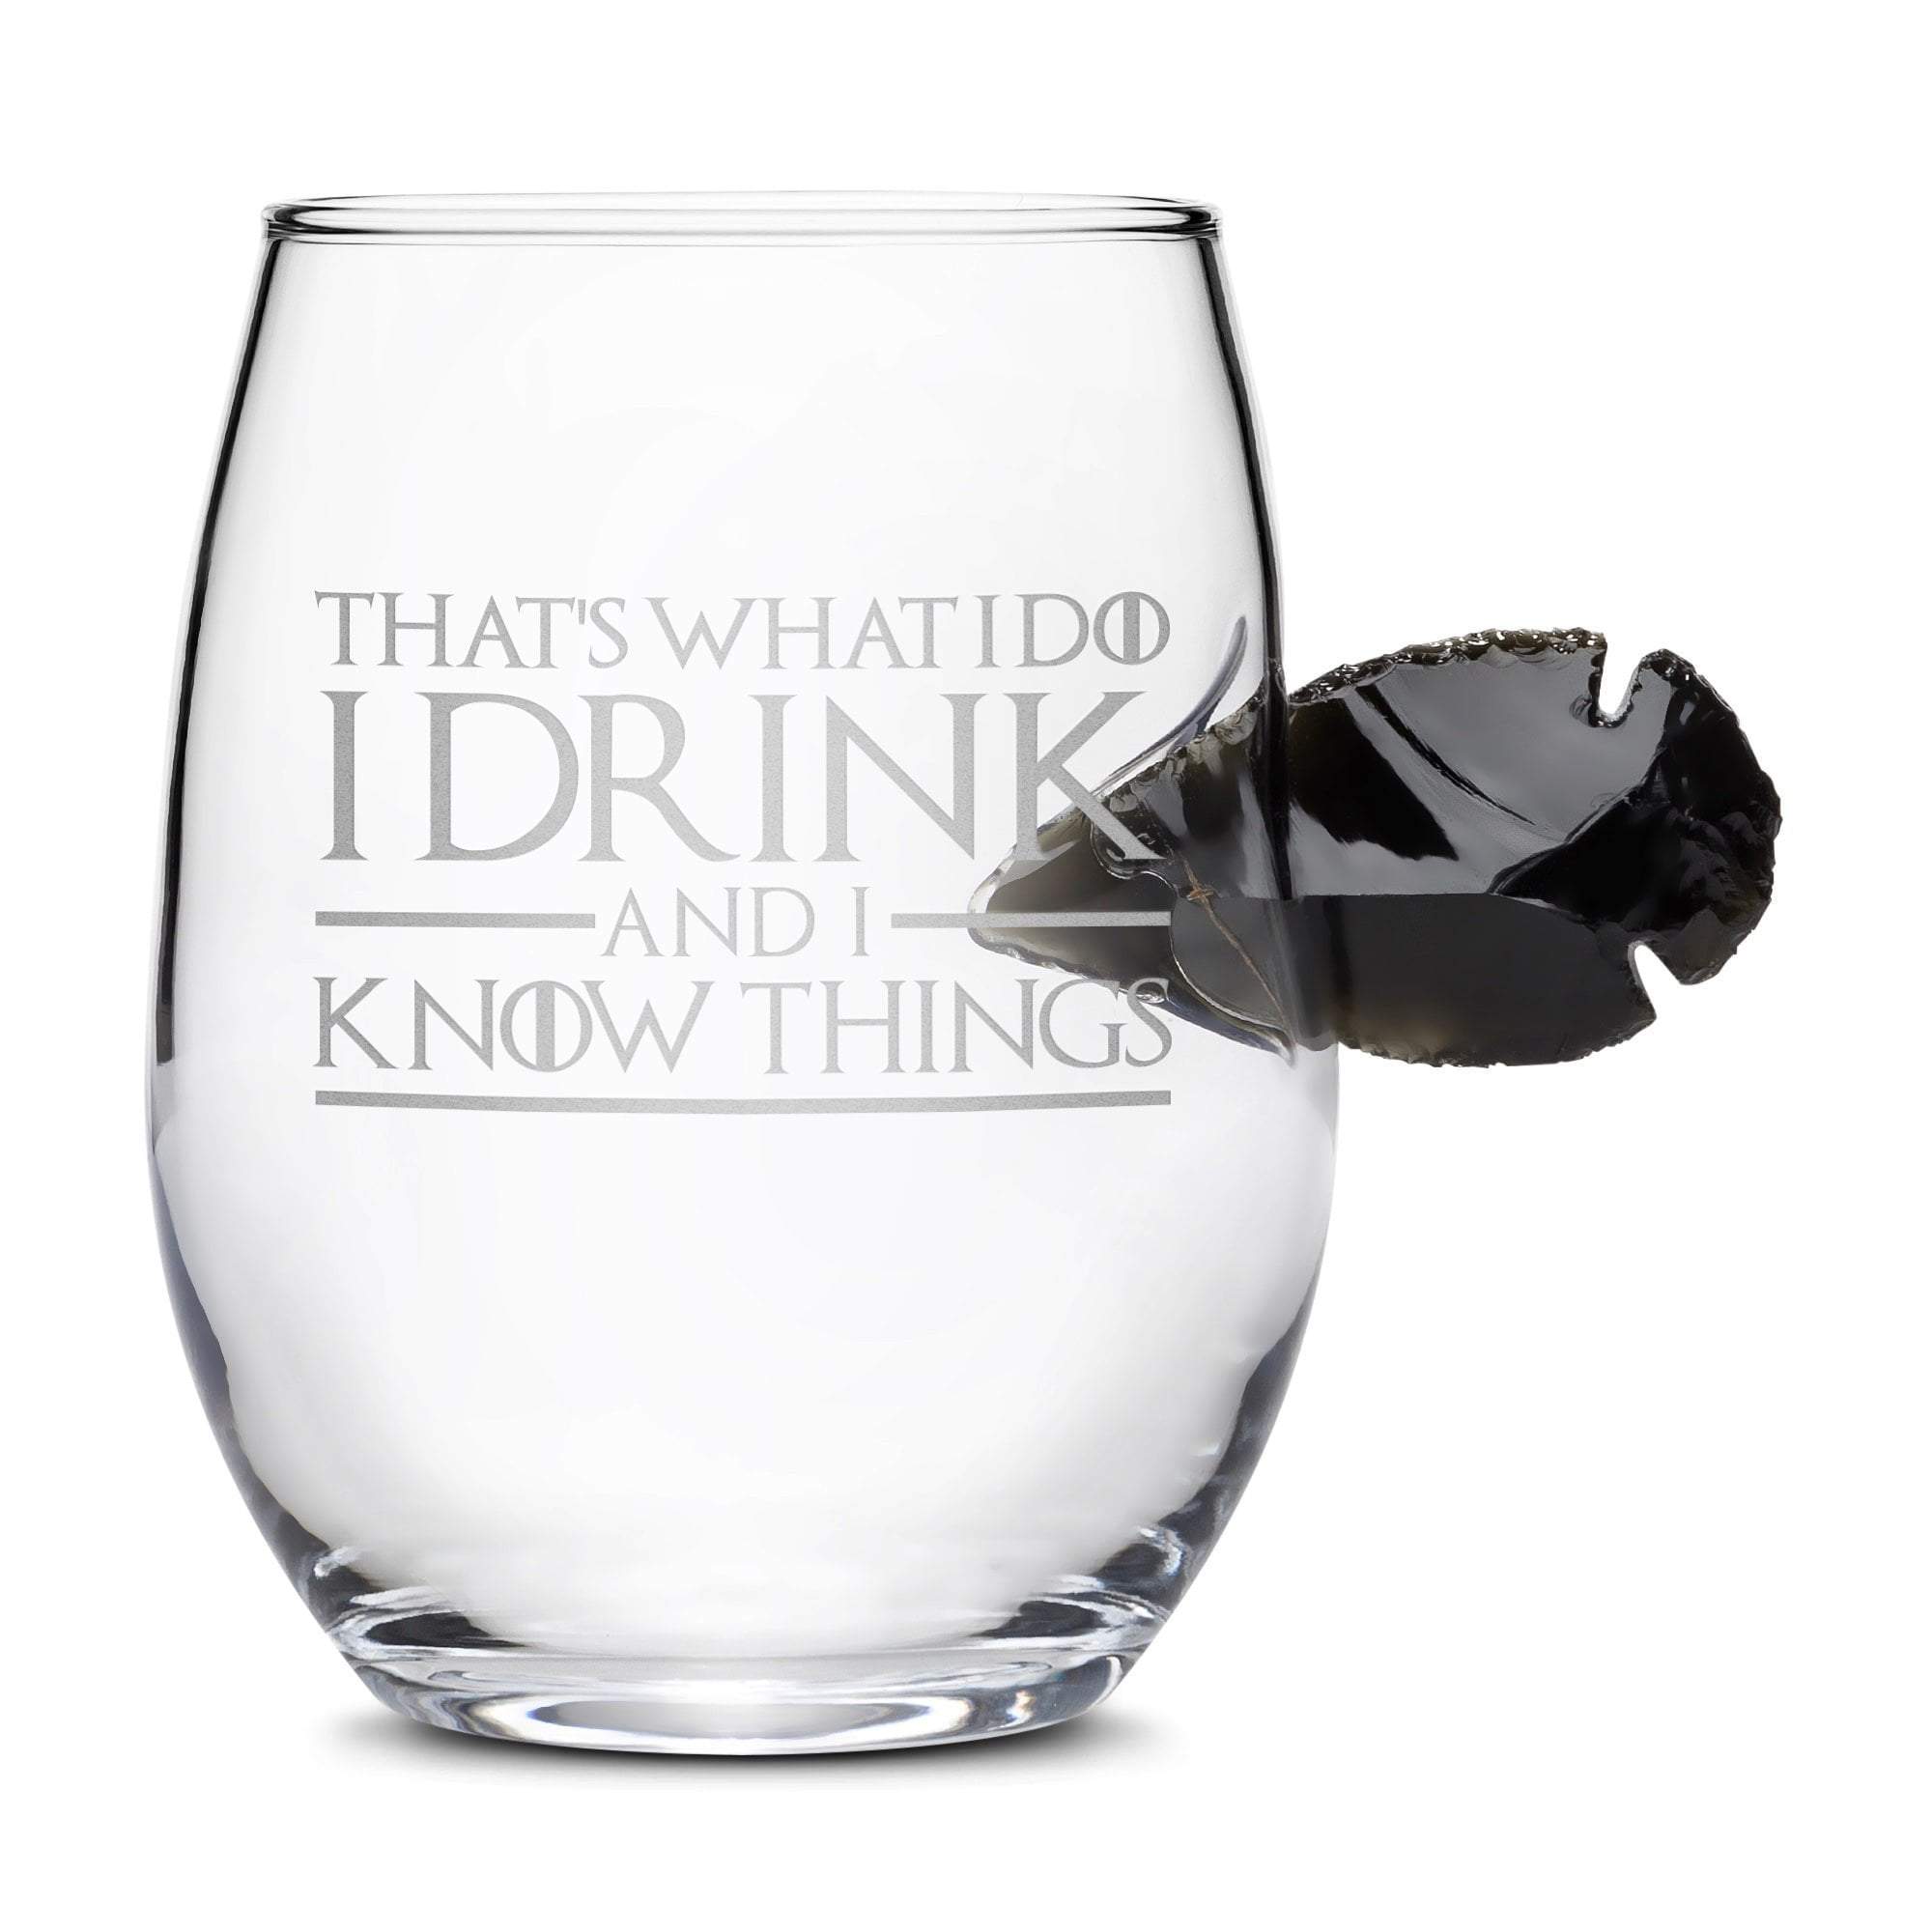 https://integritybottles.com/cdn/shop/products/limited-edition-game-of-thrones-dragon-glass-obsidian-arrowhead-stemless-wine-glass-that-s-what-i-do-i-drink-and-i-know-things-integrity-bottles-10939841413219_2000x.jpg?v=1571303316